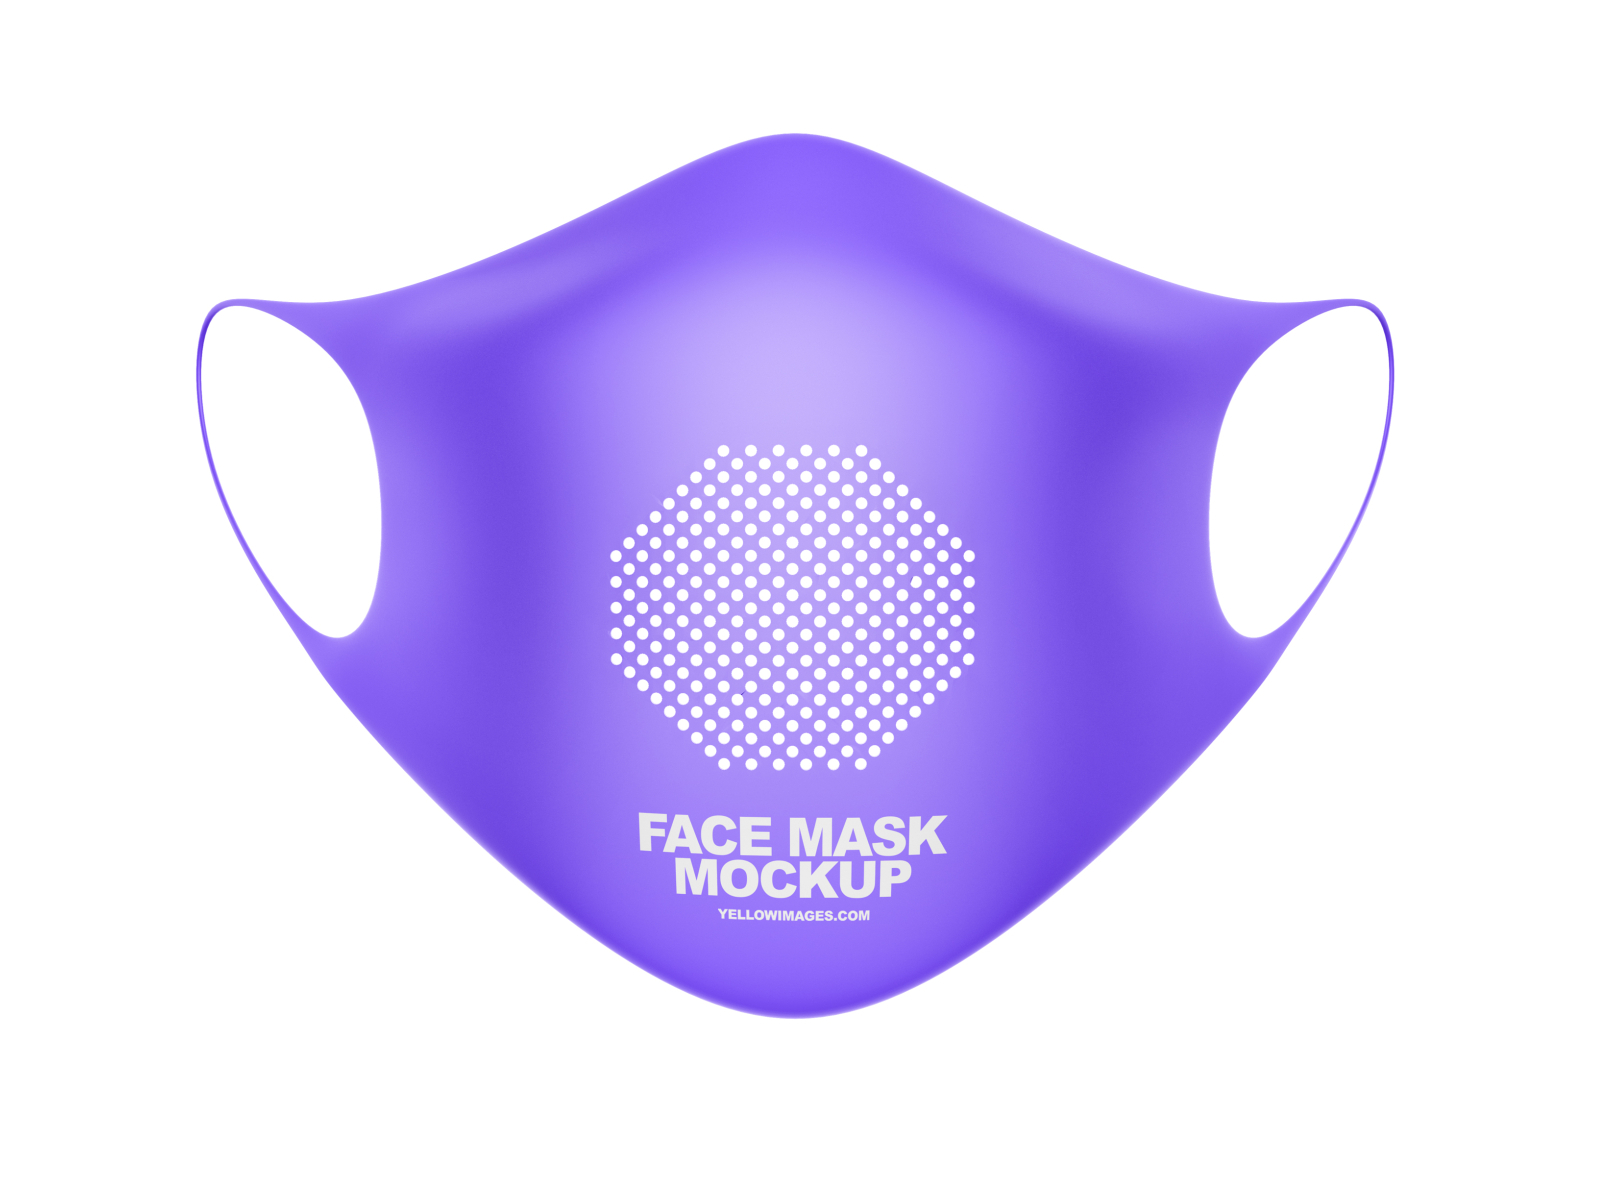 Download Free Face Mask Mockup By Vadim On Dribbble PSD Mockup Template